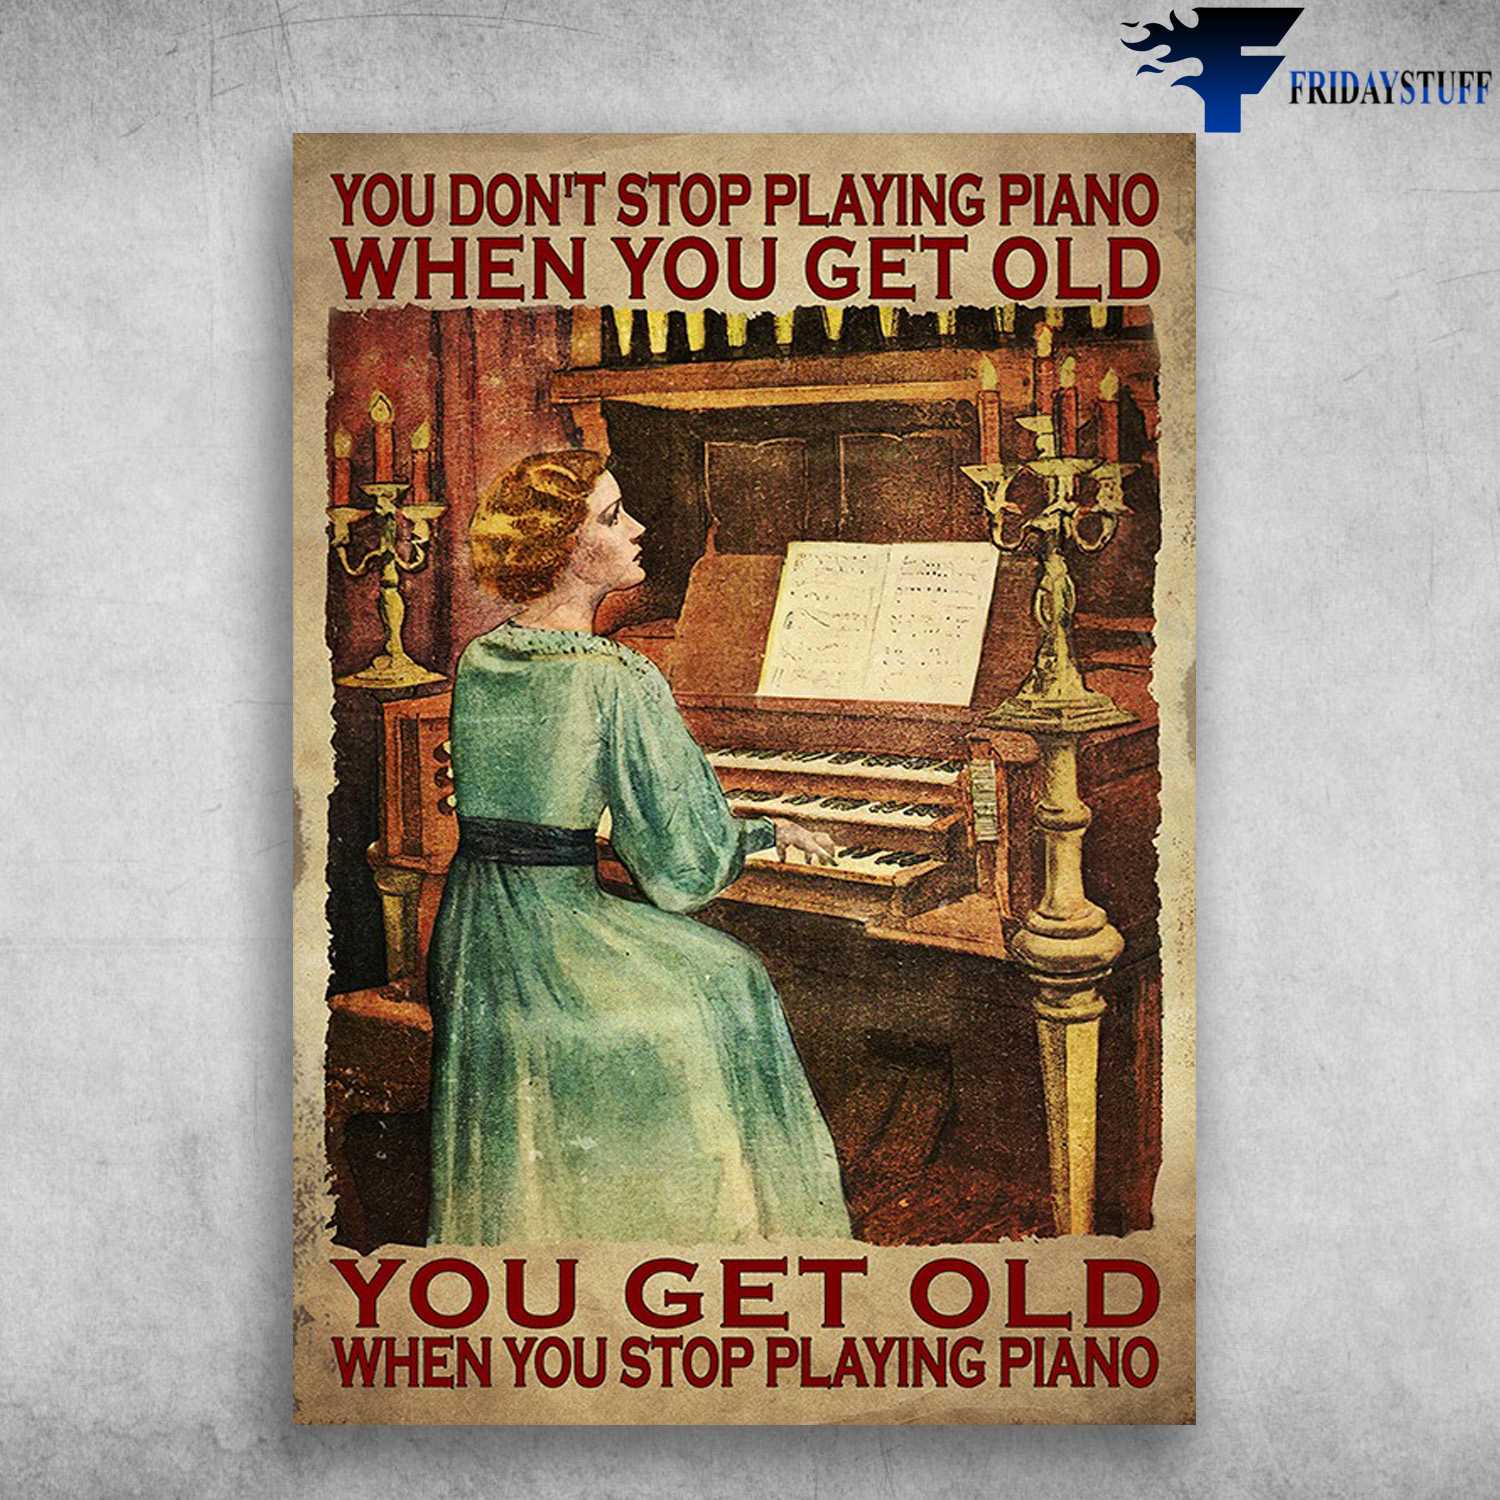 Lady Plays Piano – You Don’t Stop Playing Piano When You Get Old, You Get Old When You Stop Playing Piano